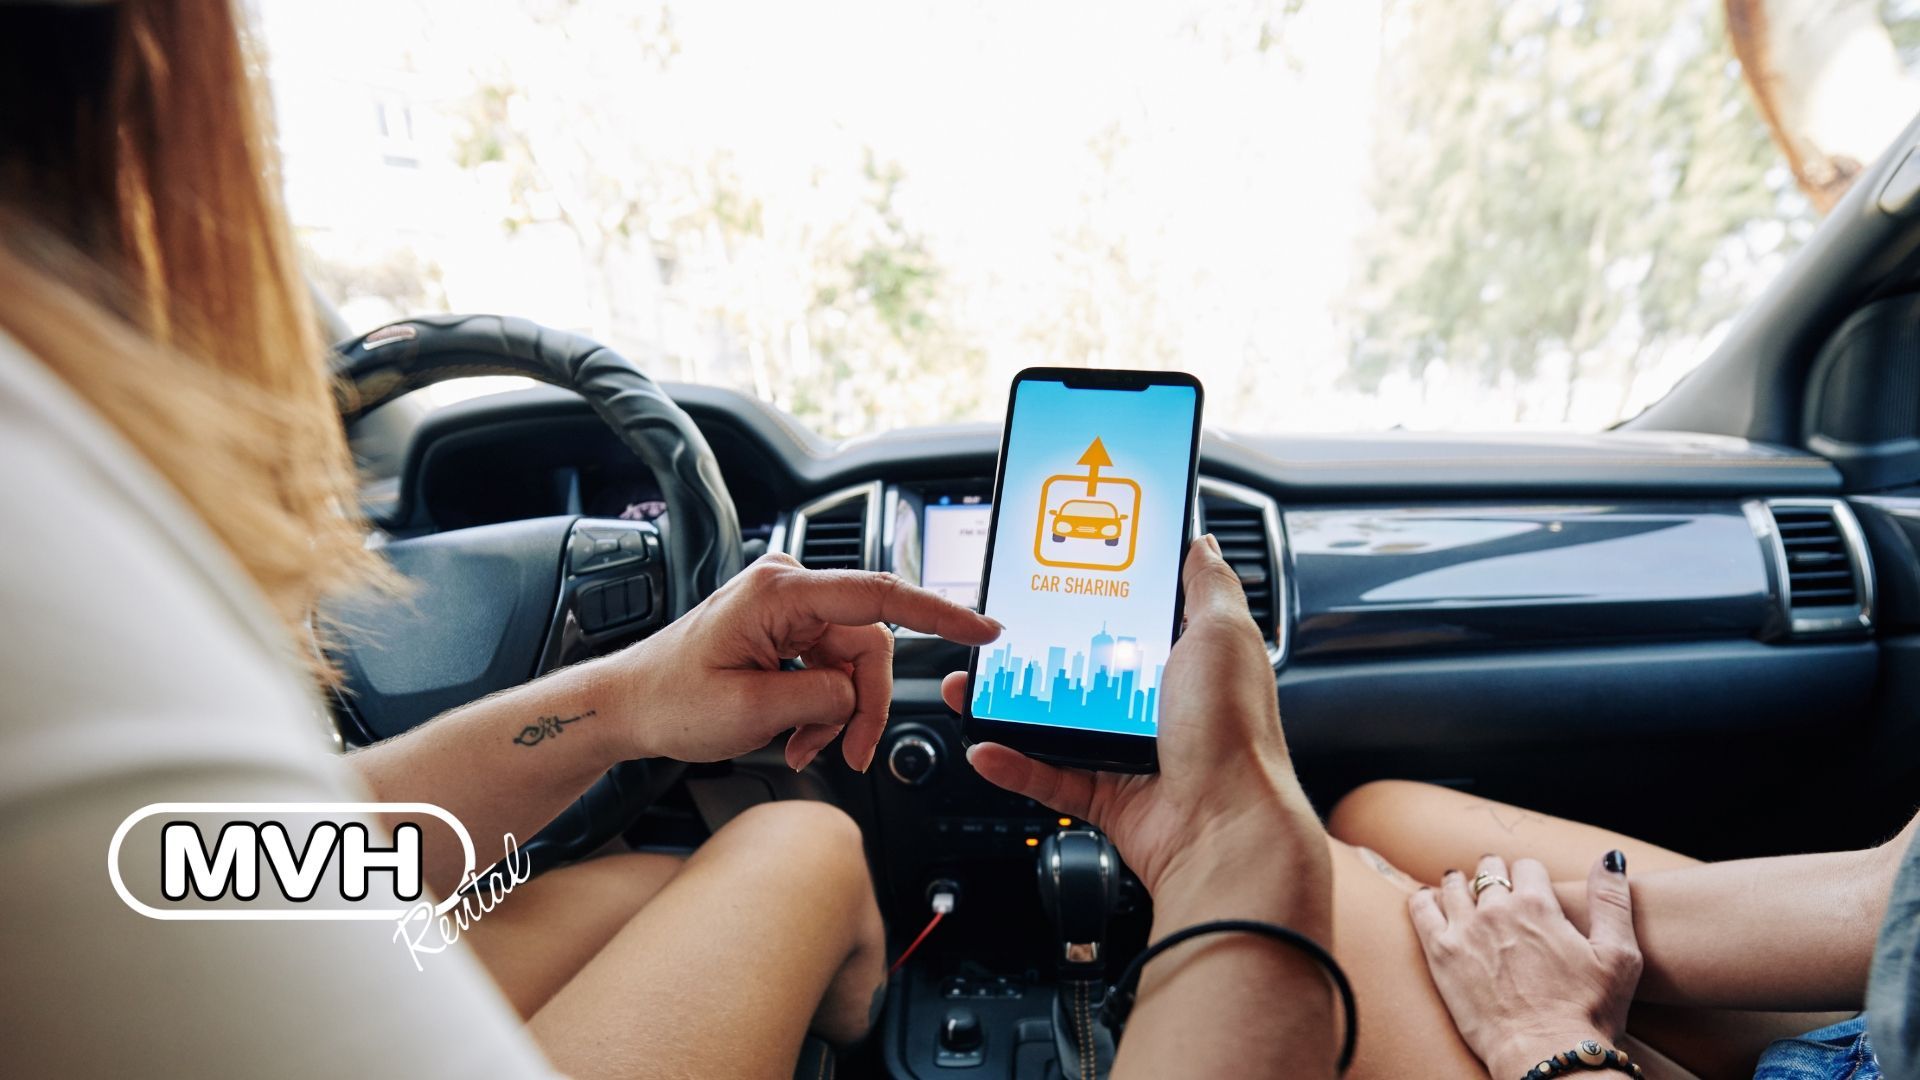 Car-sharing apps claim to offer a convenient, user-friendly way to rent a vehicle. But is this new trend hiding some uncomfortable truths?